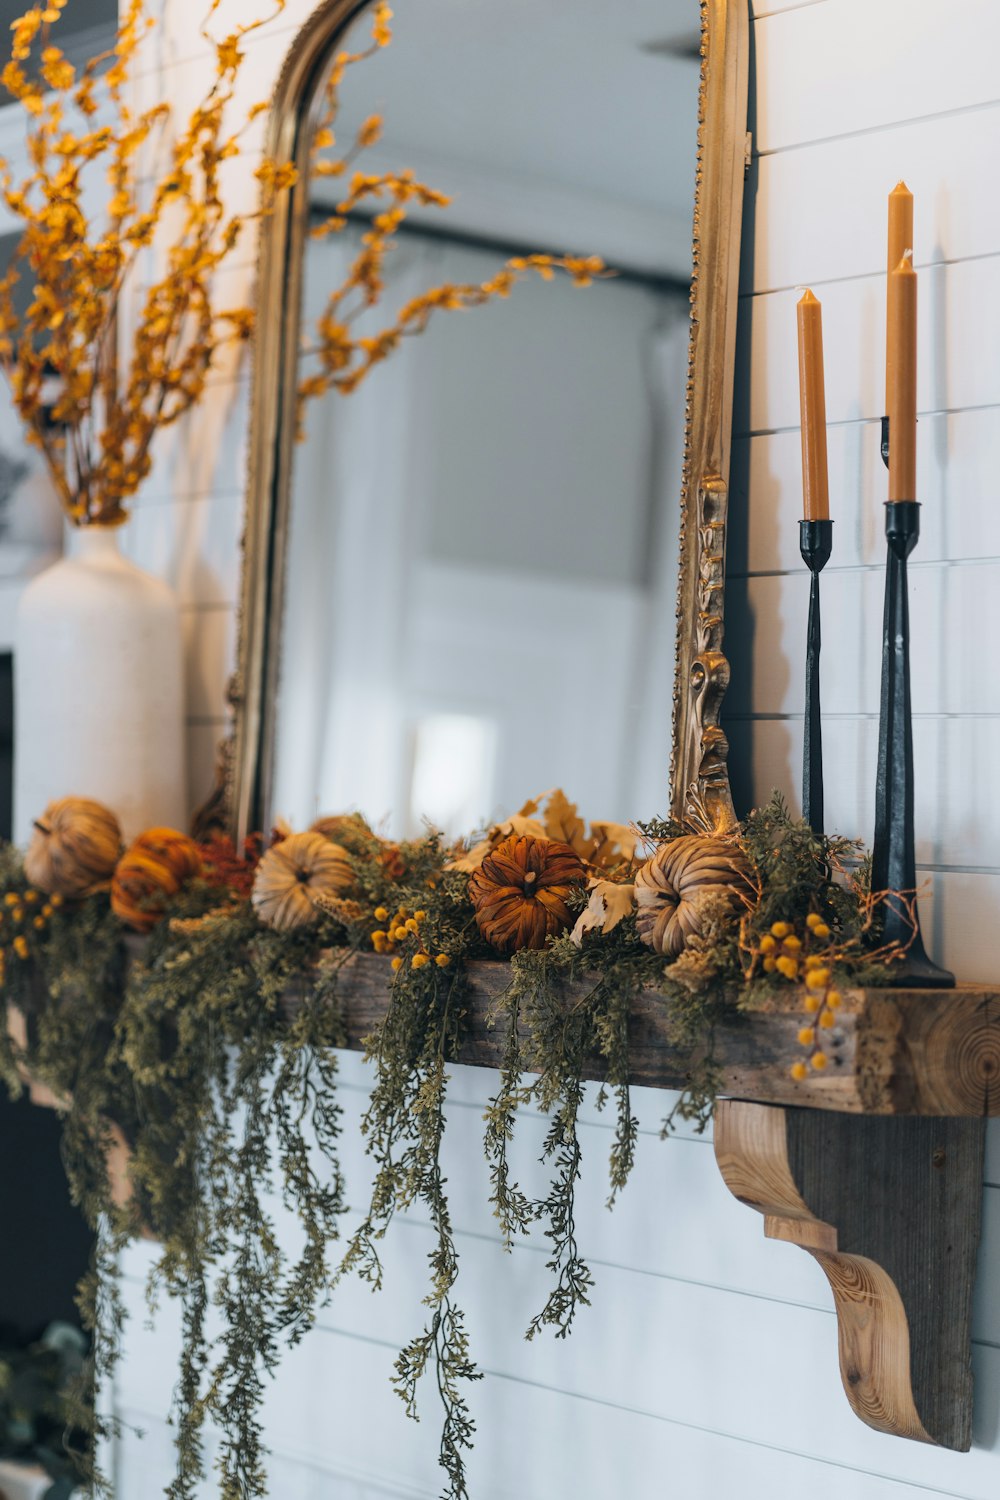 a mirror and some candles on a mantle